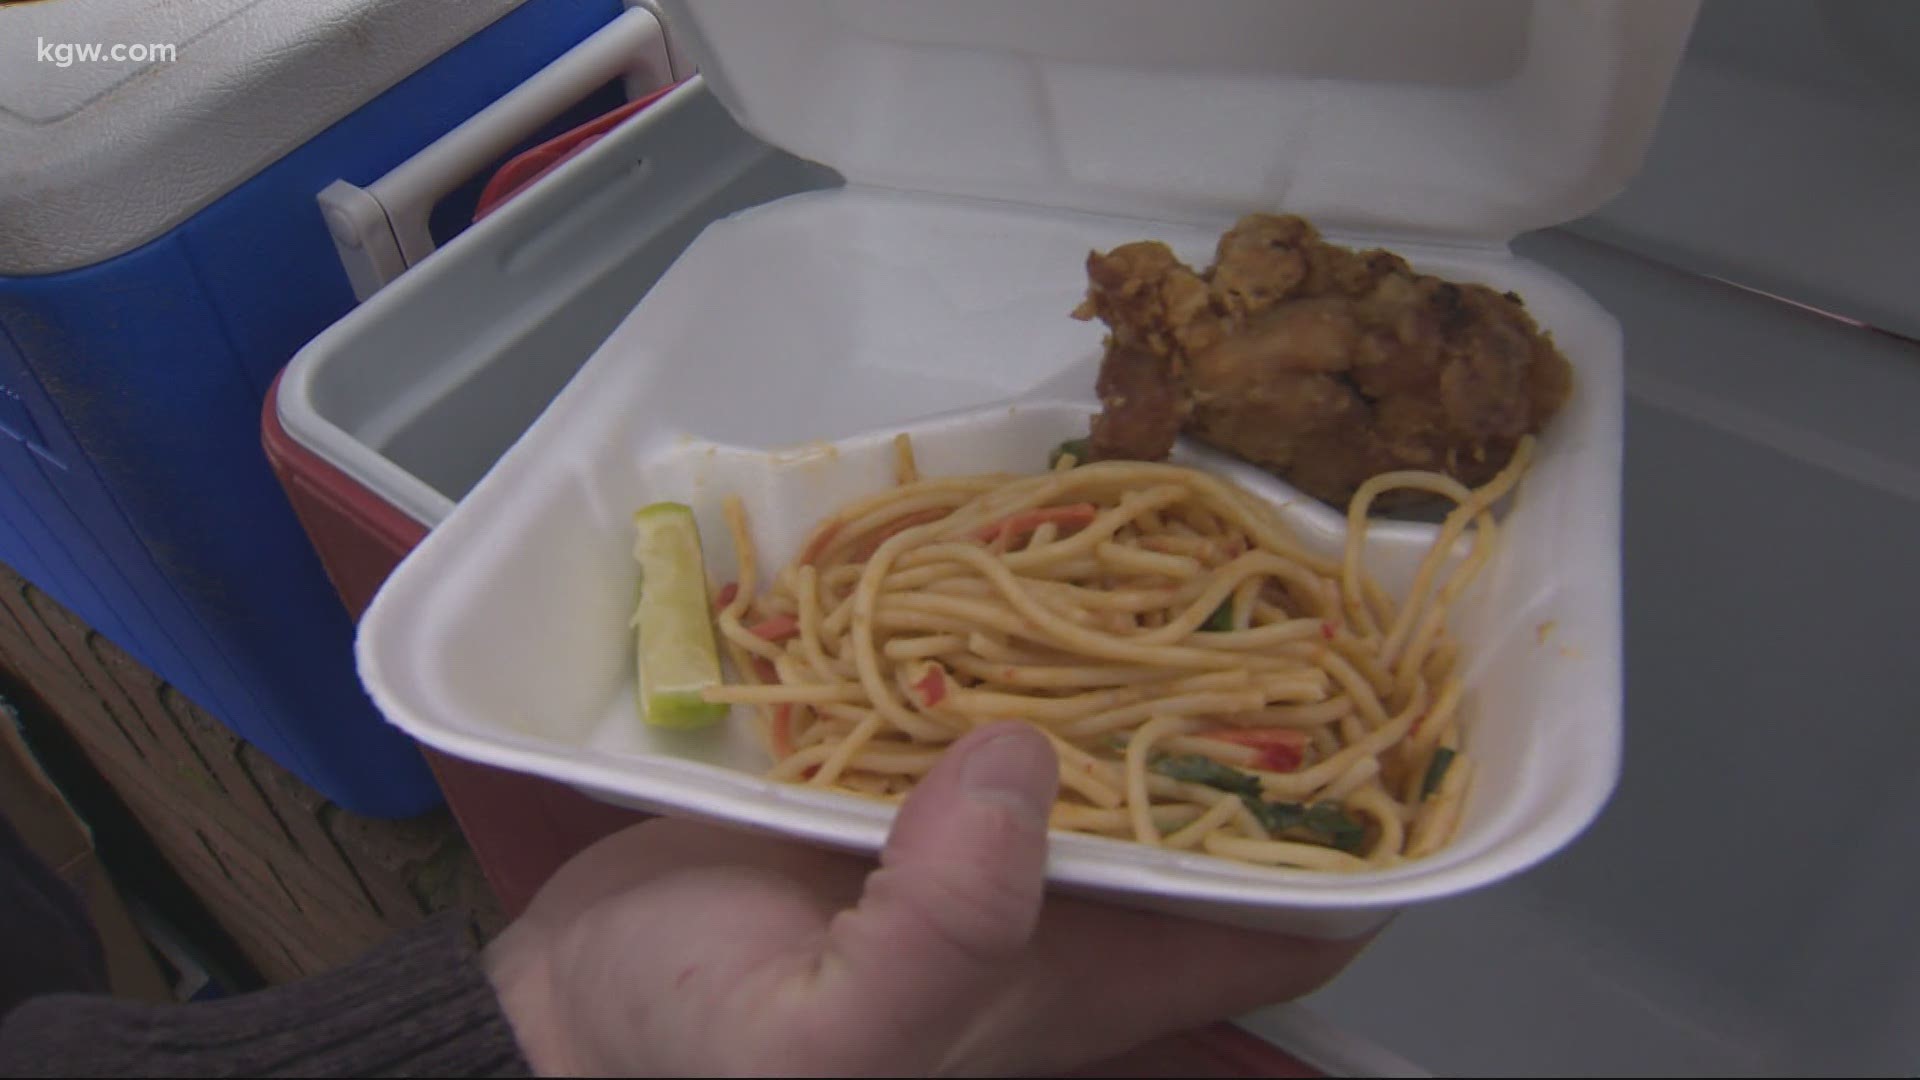 A potluck in Portland’s St. Johns neighborhood is feeding more than 100 people per week. The woman serving up meals is asking for help to meet the demand.